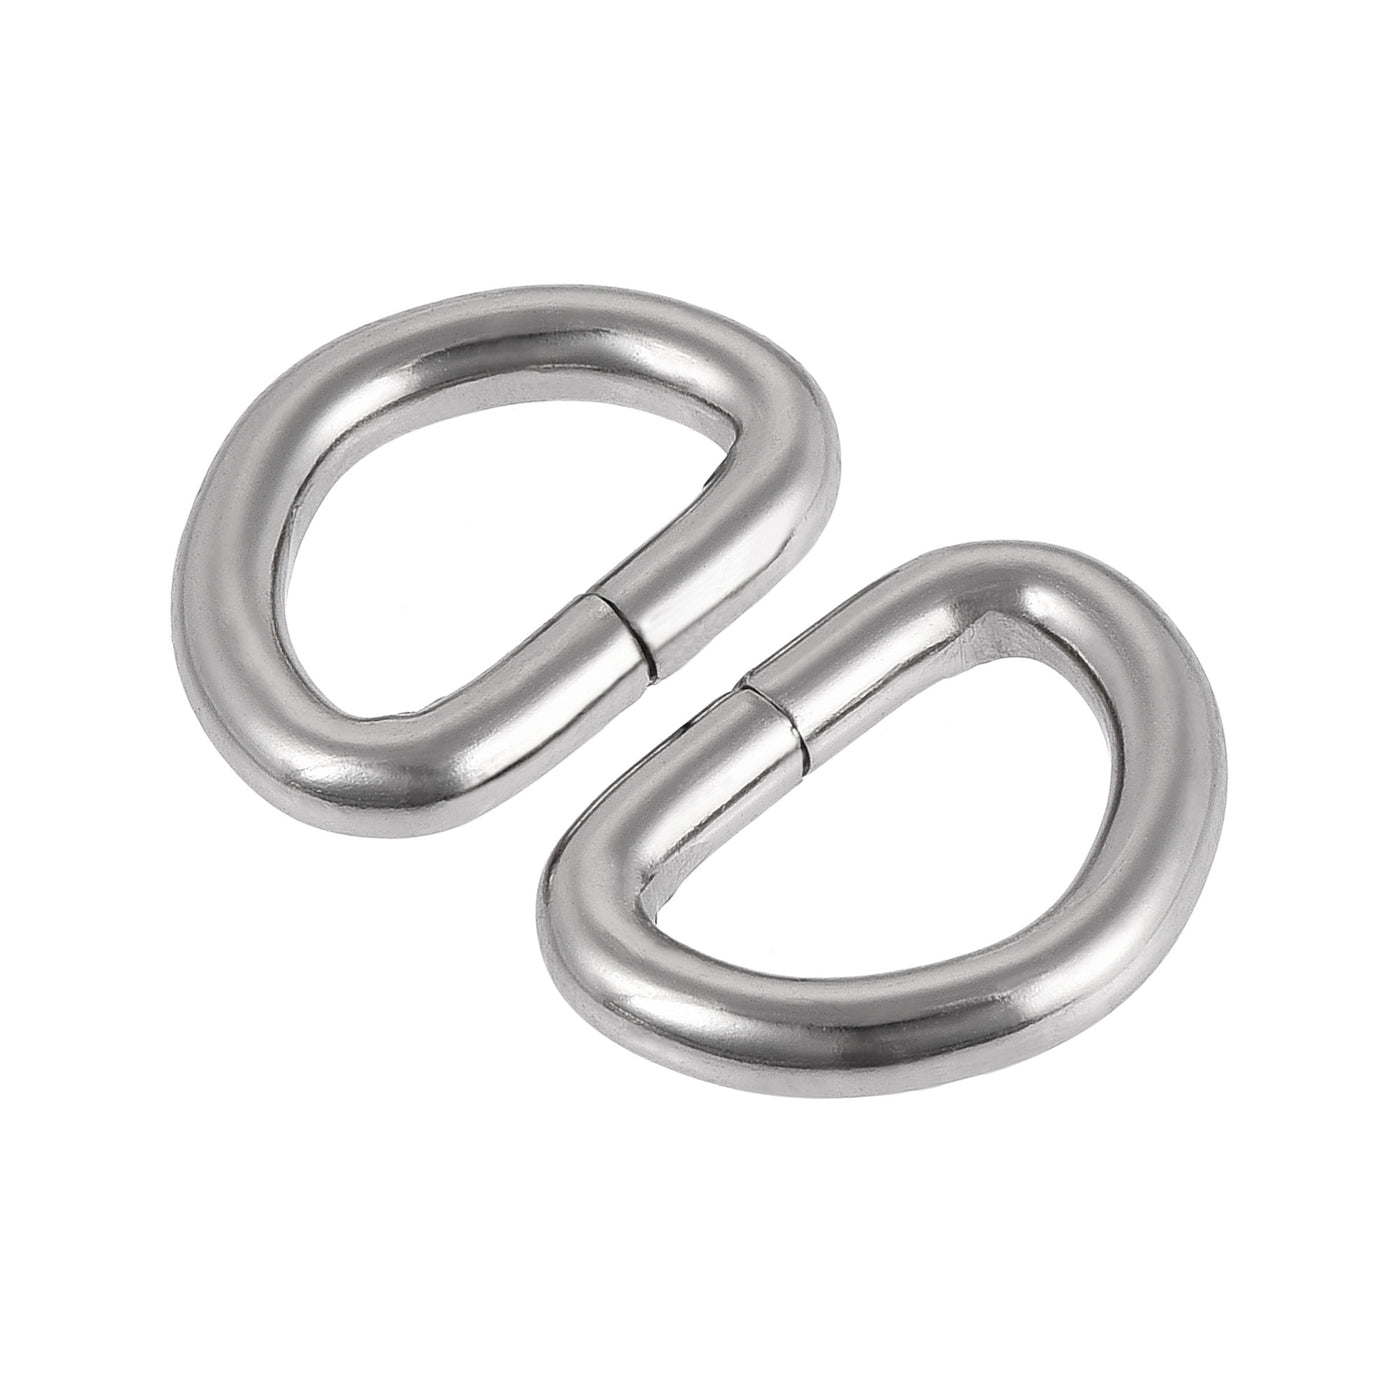 uxcell Uxcell Metal D Ring 0.63"(16mm) D-Rings Buckle for Hardware Bags Belts Craft DIY Accessories Silver Tone 100pcs